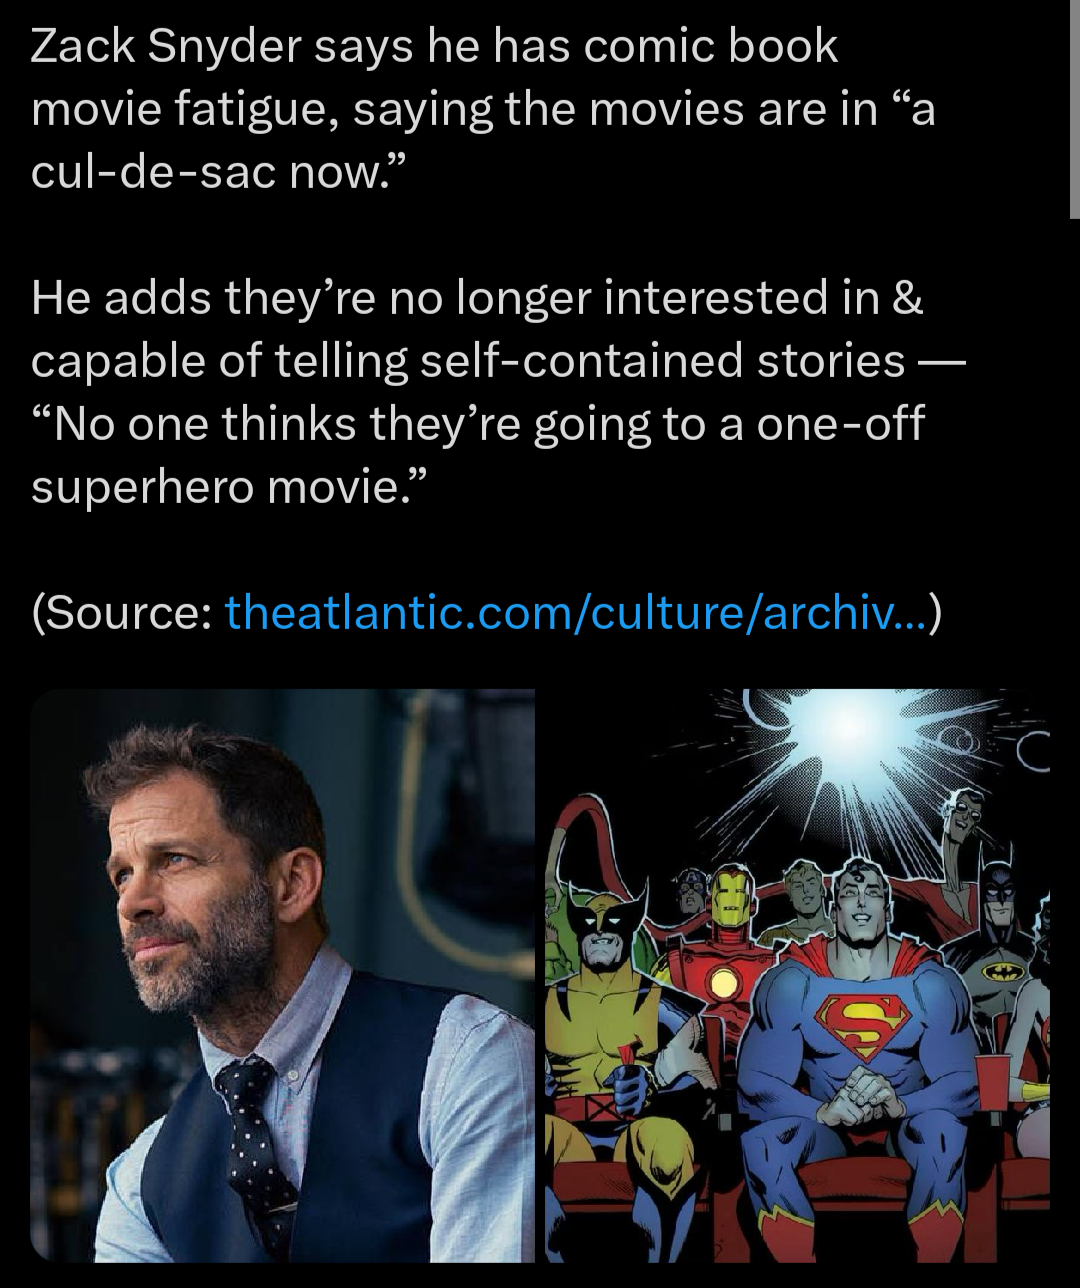 r/comicbookmovies - Zack Snyder discusses why he's developed comic book movie fatigue